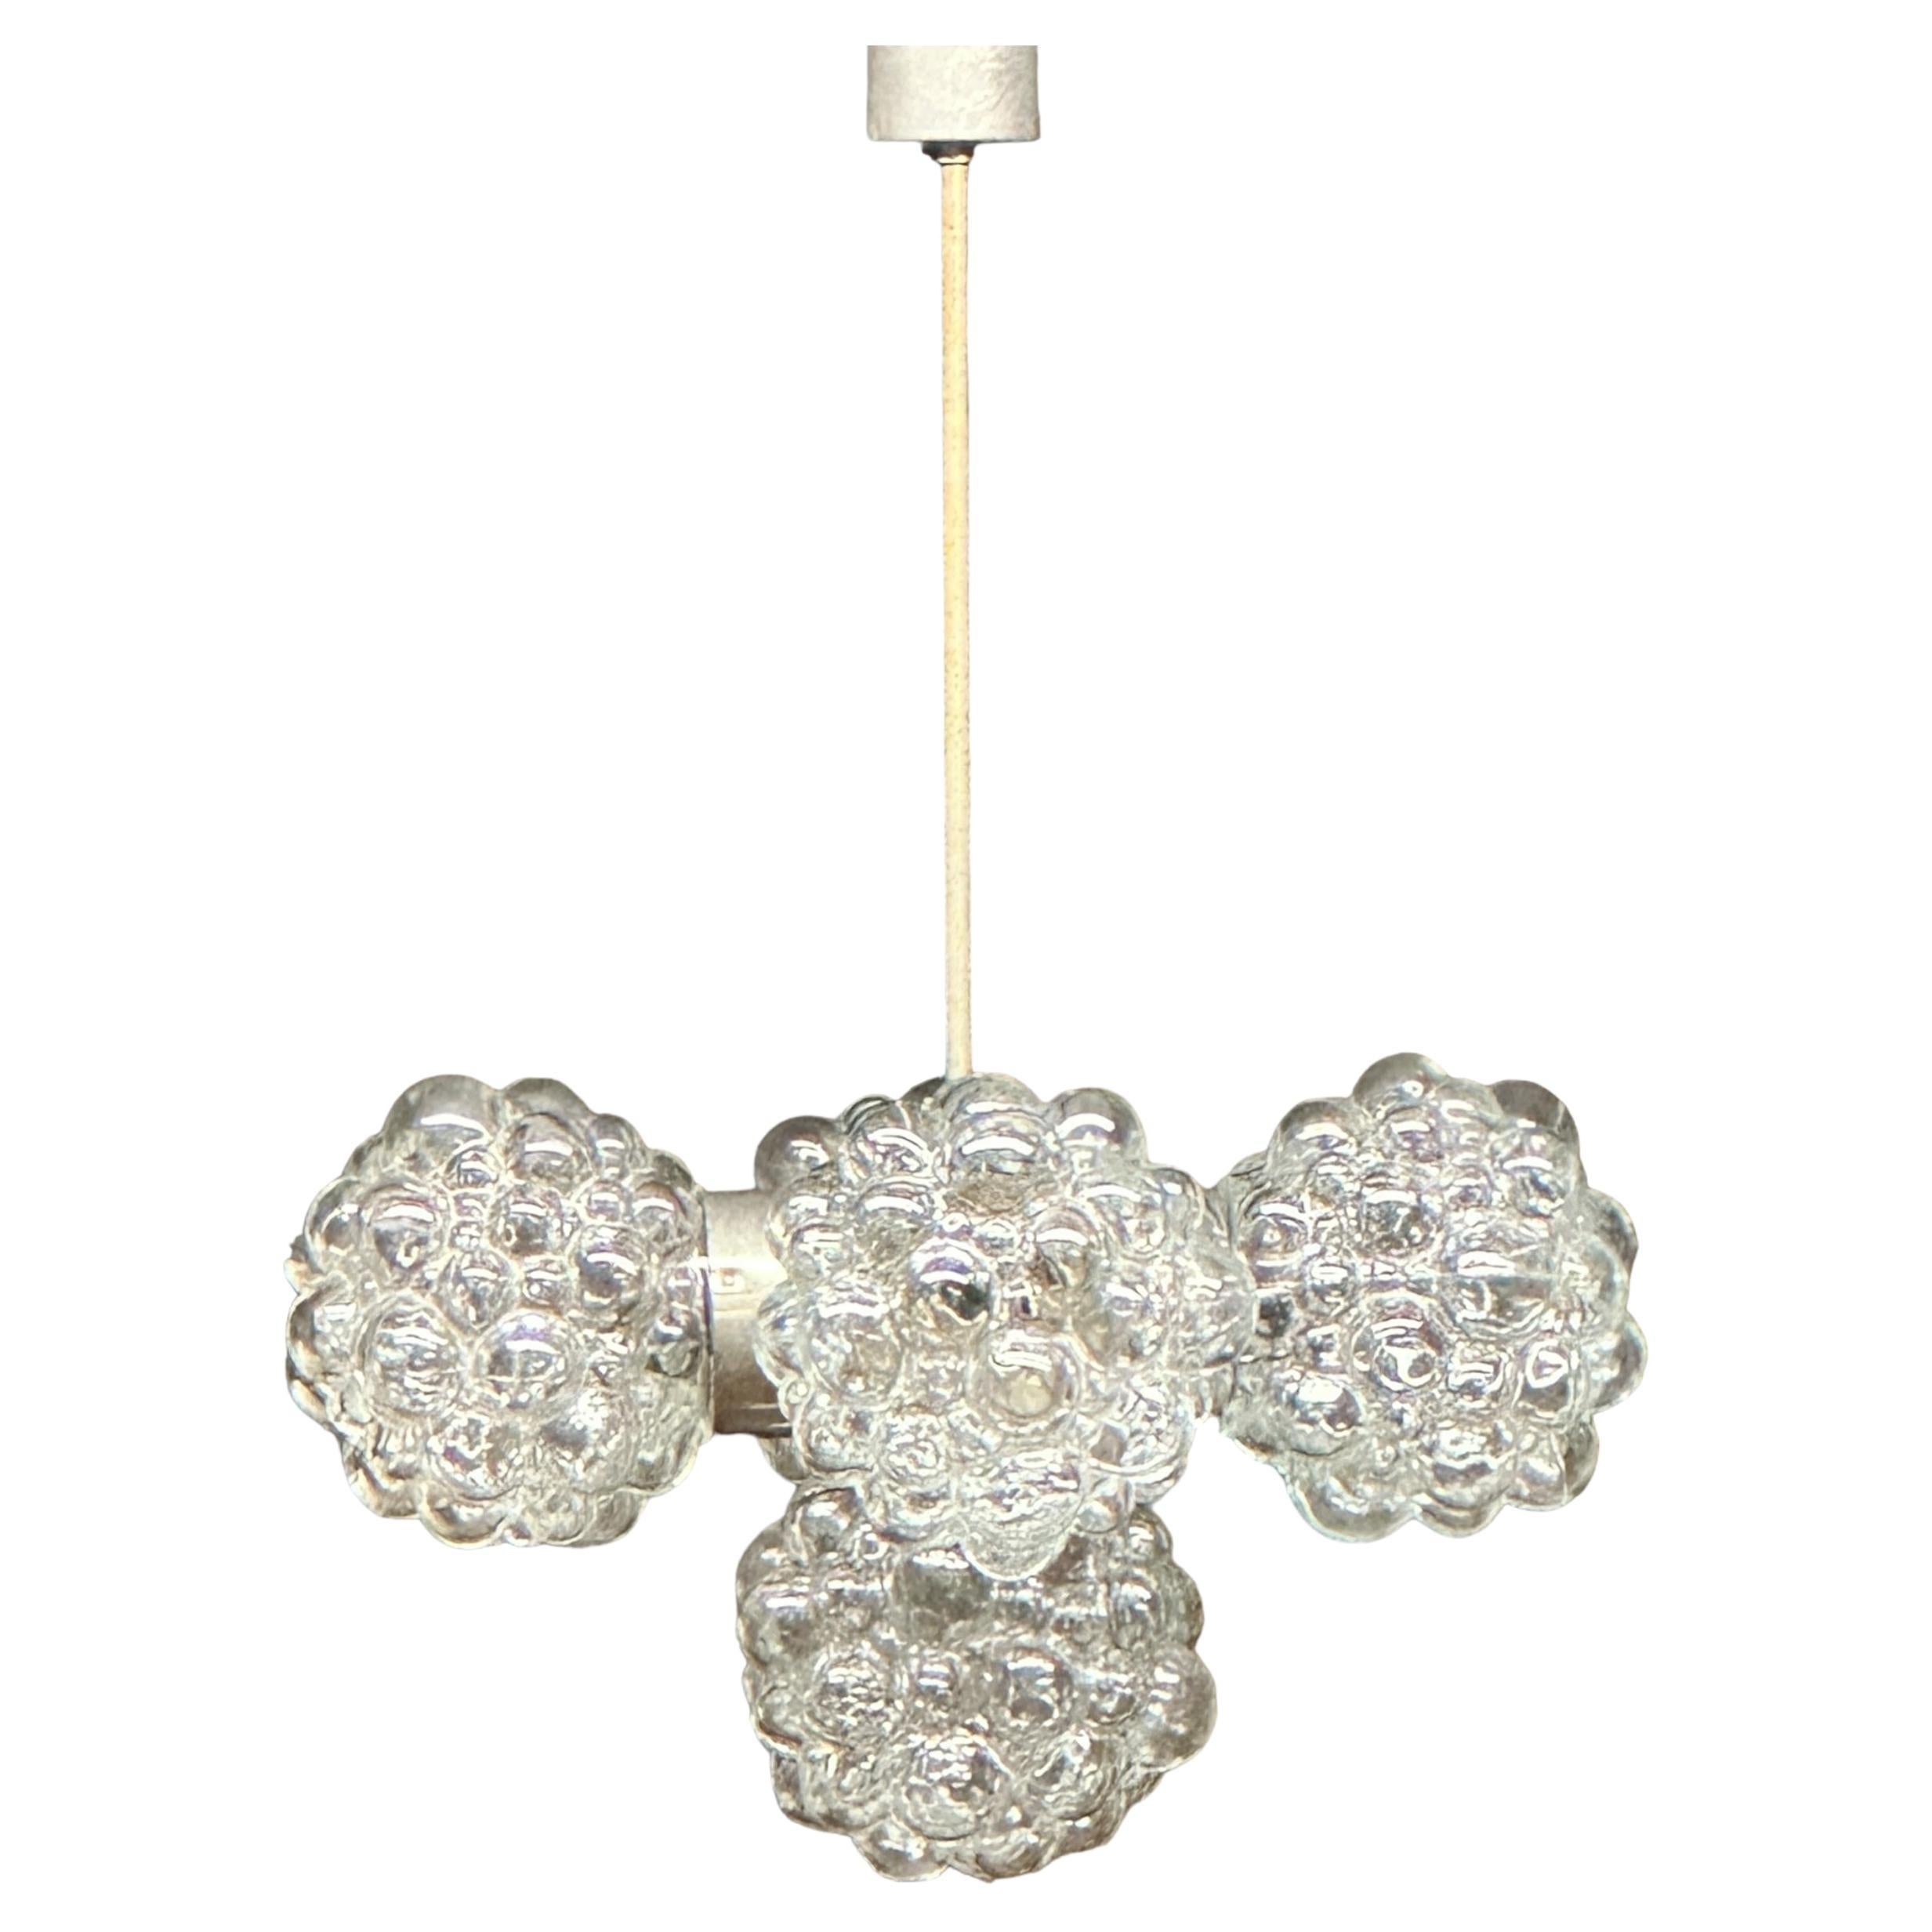 5 Light Bubble Glass Helena Tynell Style Chandelier, Austria 1960s For Sale 13